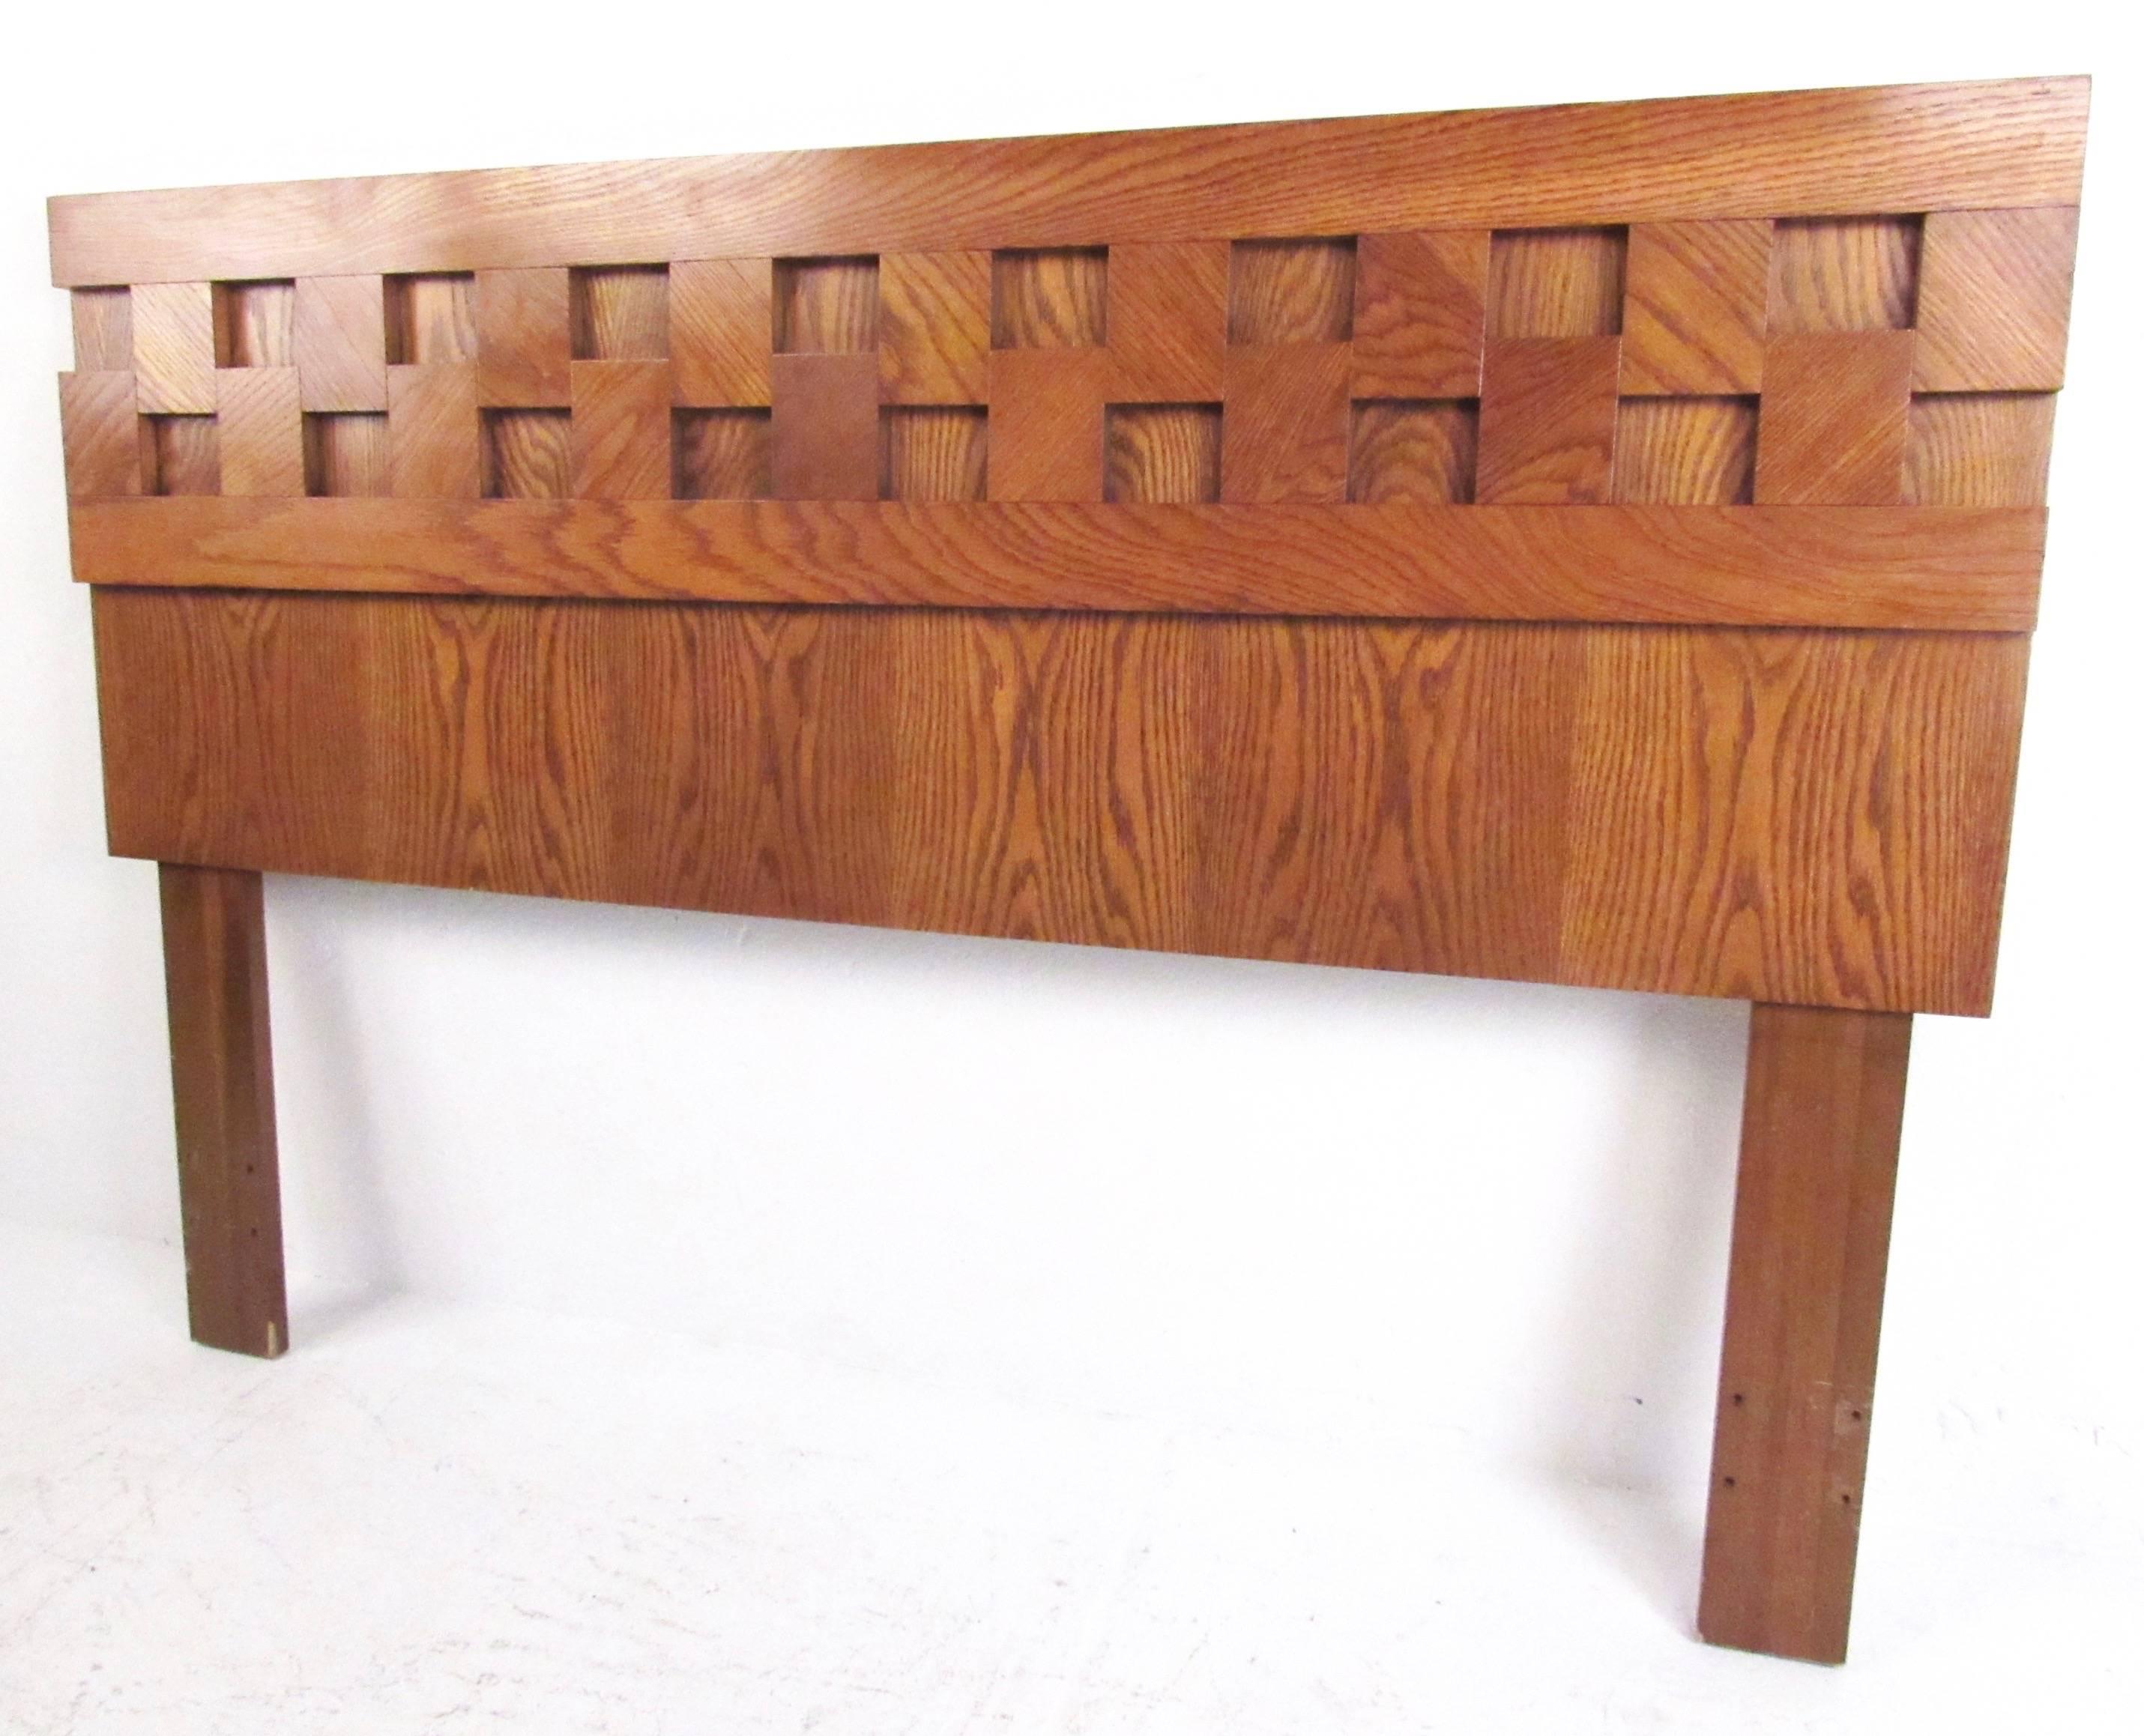 This stylish Brutalist modern headboard features a unique oak finish, sculptural matched grain design, and fits a standard queen-size mattress. Please confirm item location (NY or NJ).